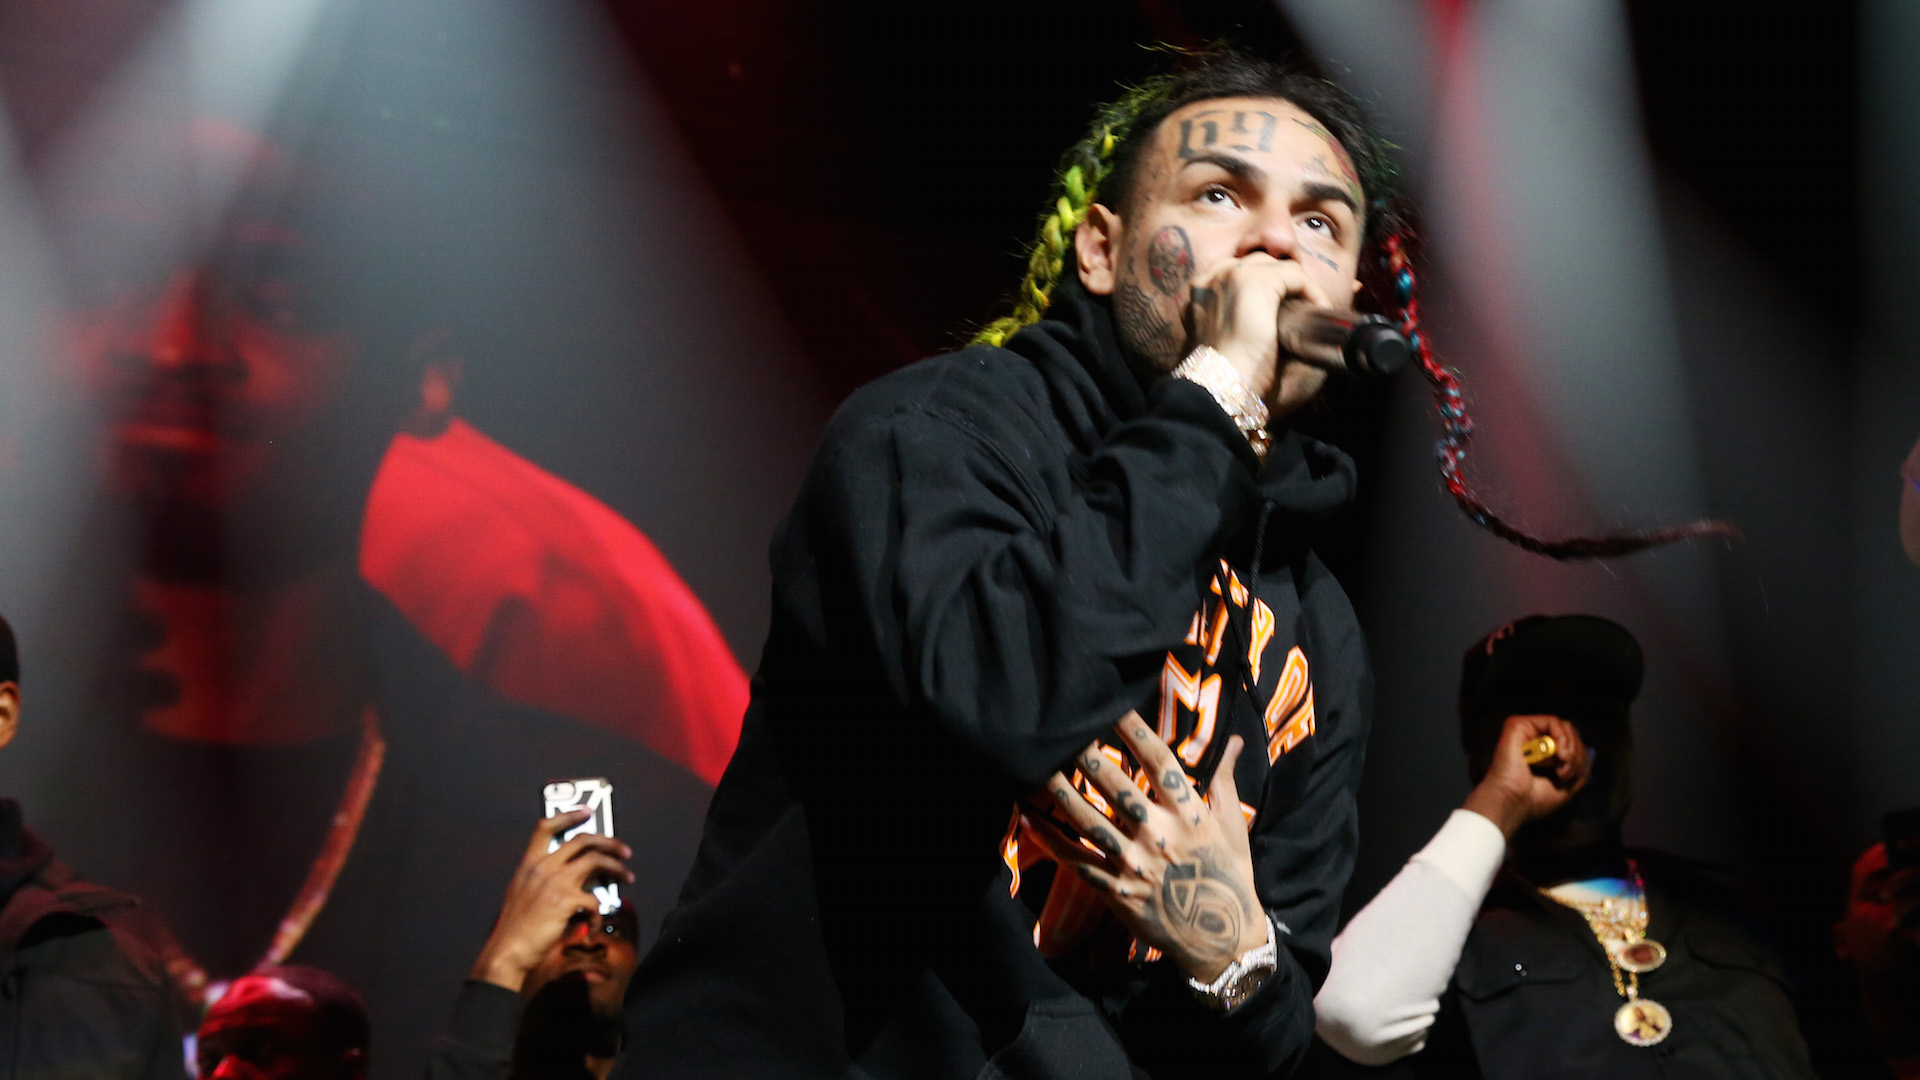 6ix9ine Likens Himself to the Joker: ‘There’s Somewhere Deep Down Where You Fall in Love With That Guy’